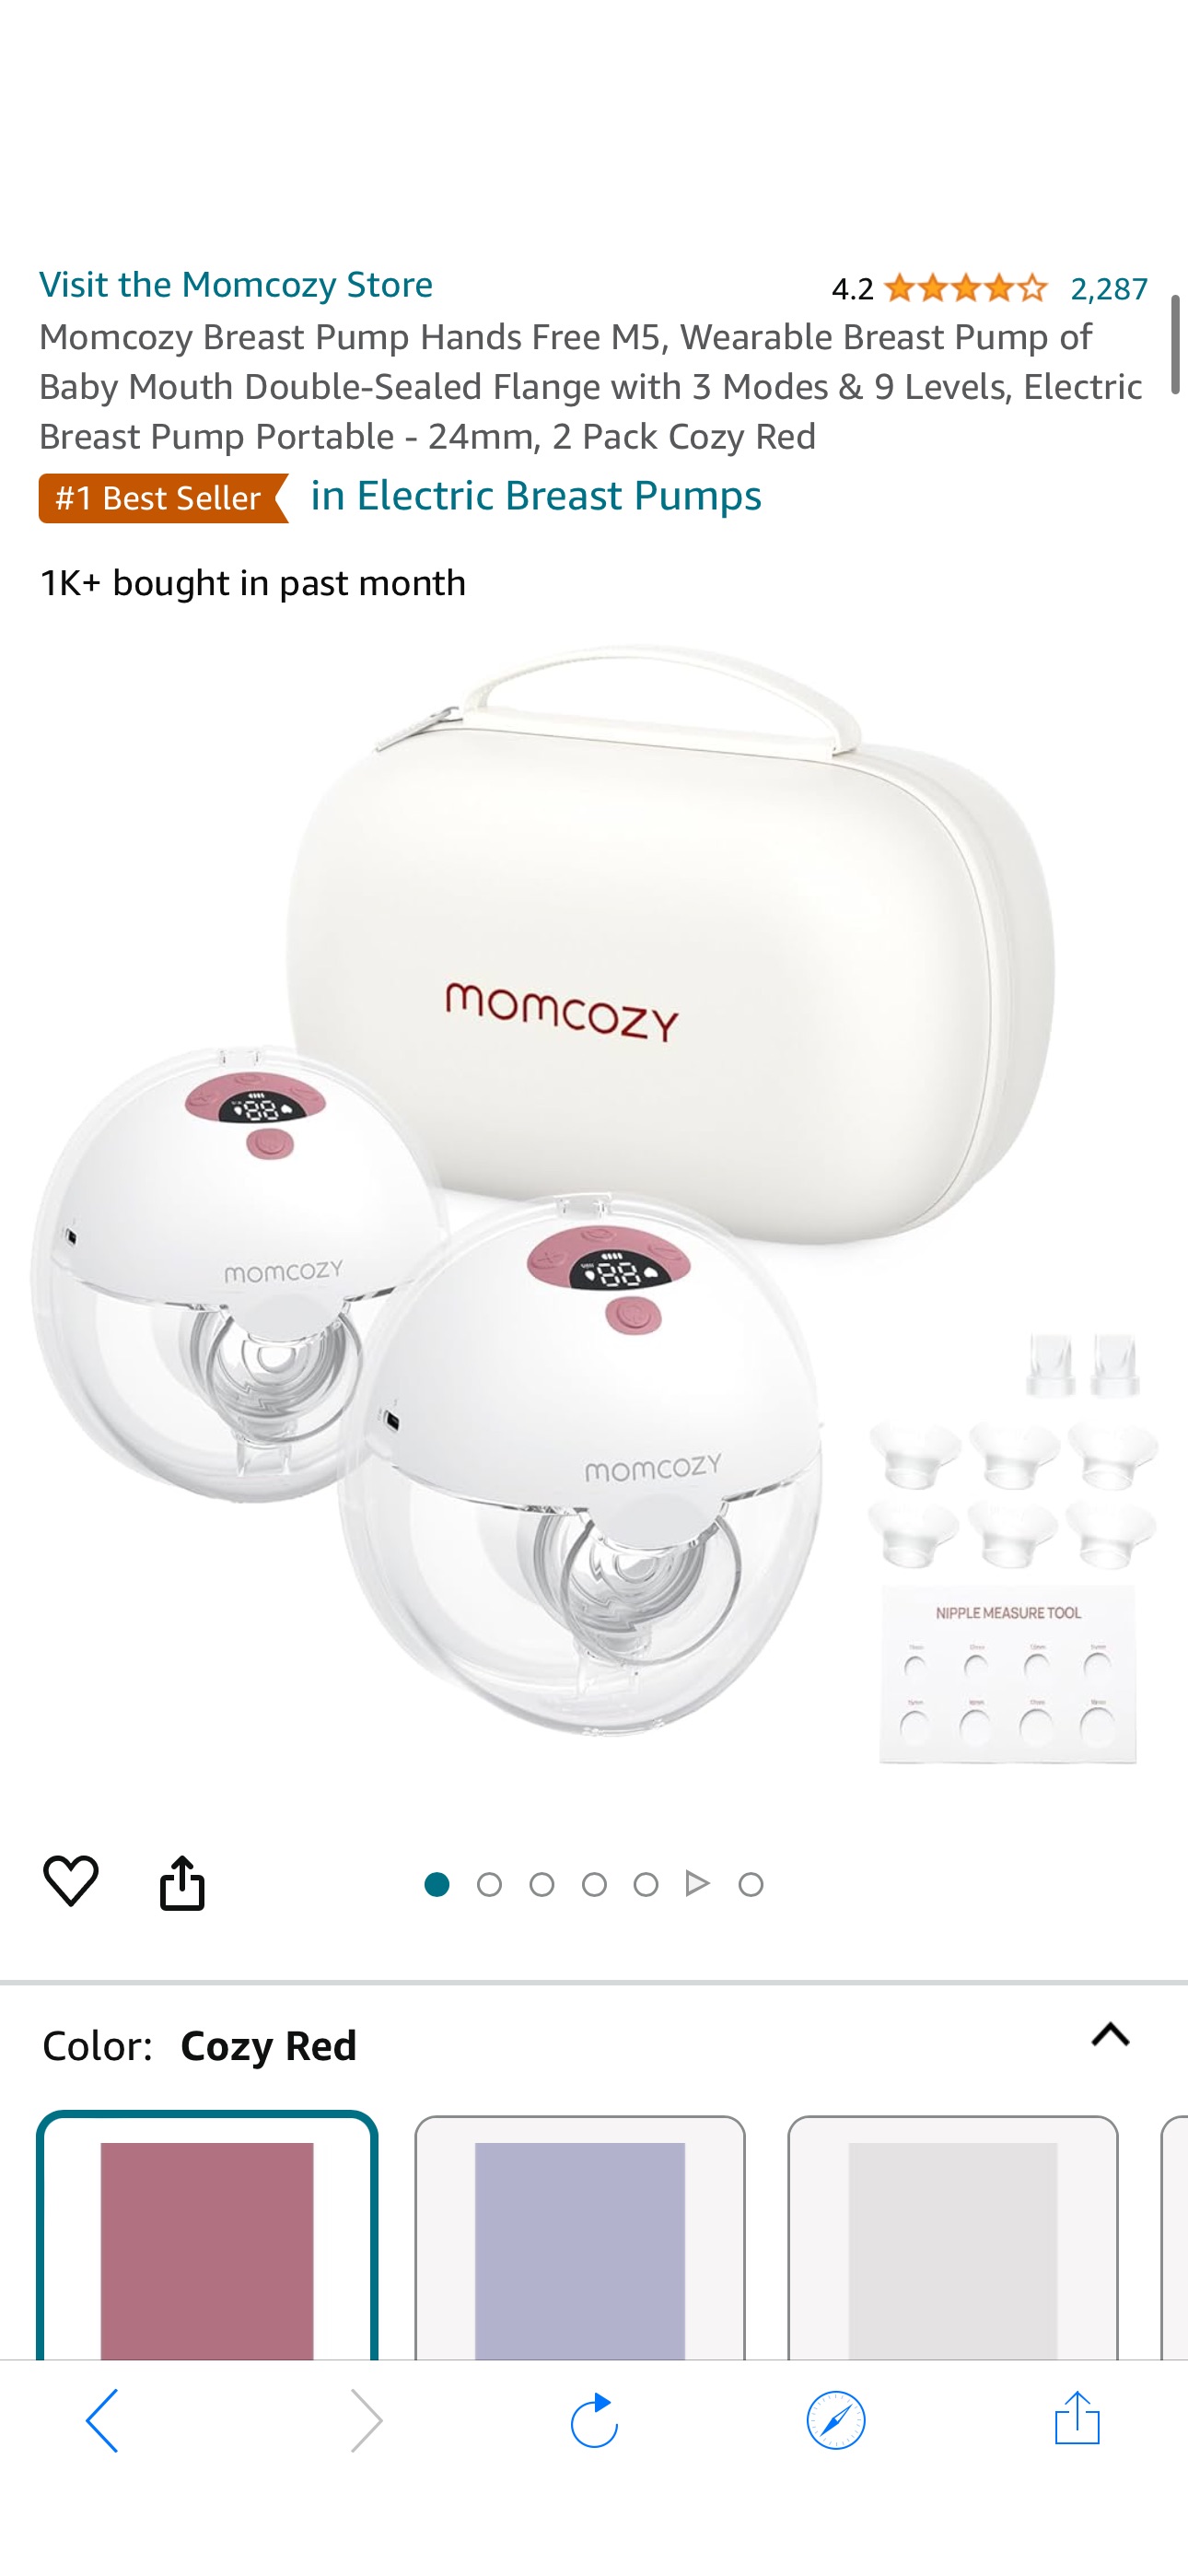 Amazon.com : Momcozy Breast Pump Hands Free M5, Wearable Breast Pump of Baby Mouth Double-Sealed Flange with 3 Modes & 9 Levels, Electric Breast Pump Portable - 24mm, 2 Pack Cozy Red : Baby